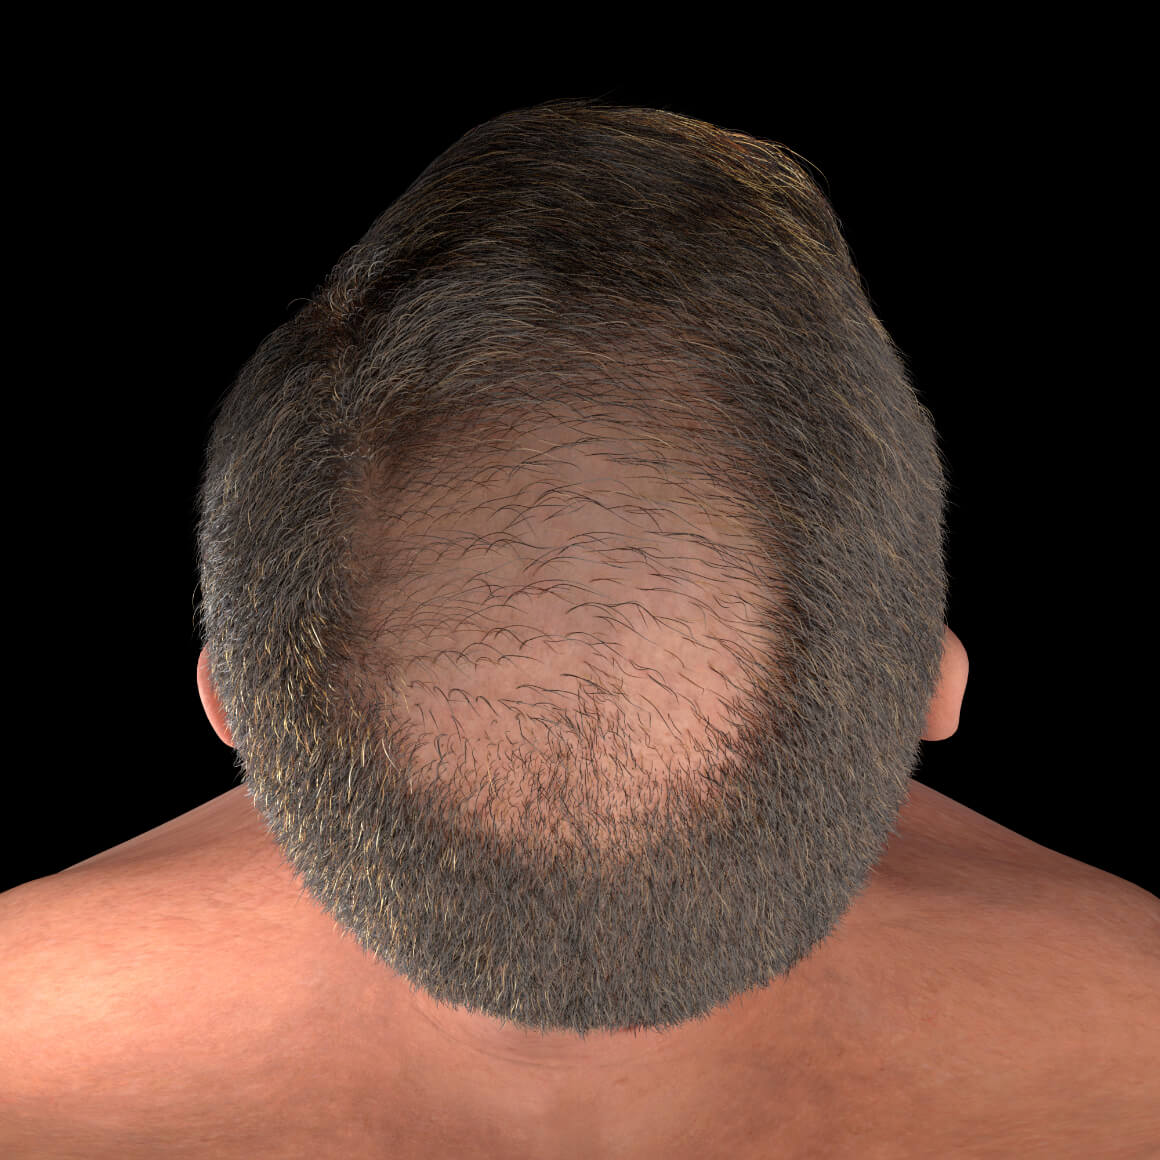 Scalp of a Clinique Chloé male patient showing thinning hair